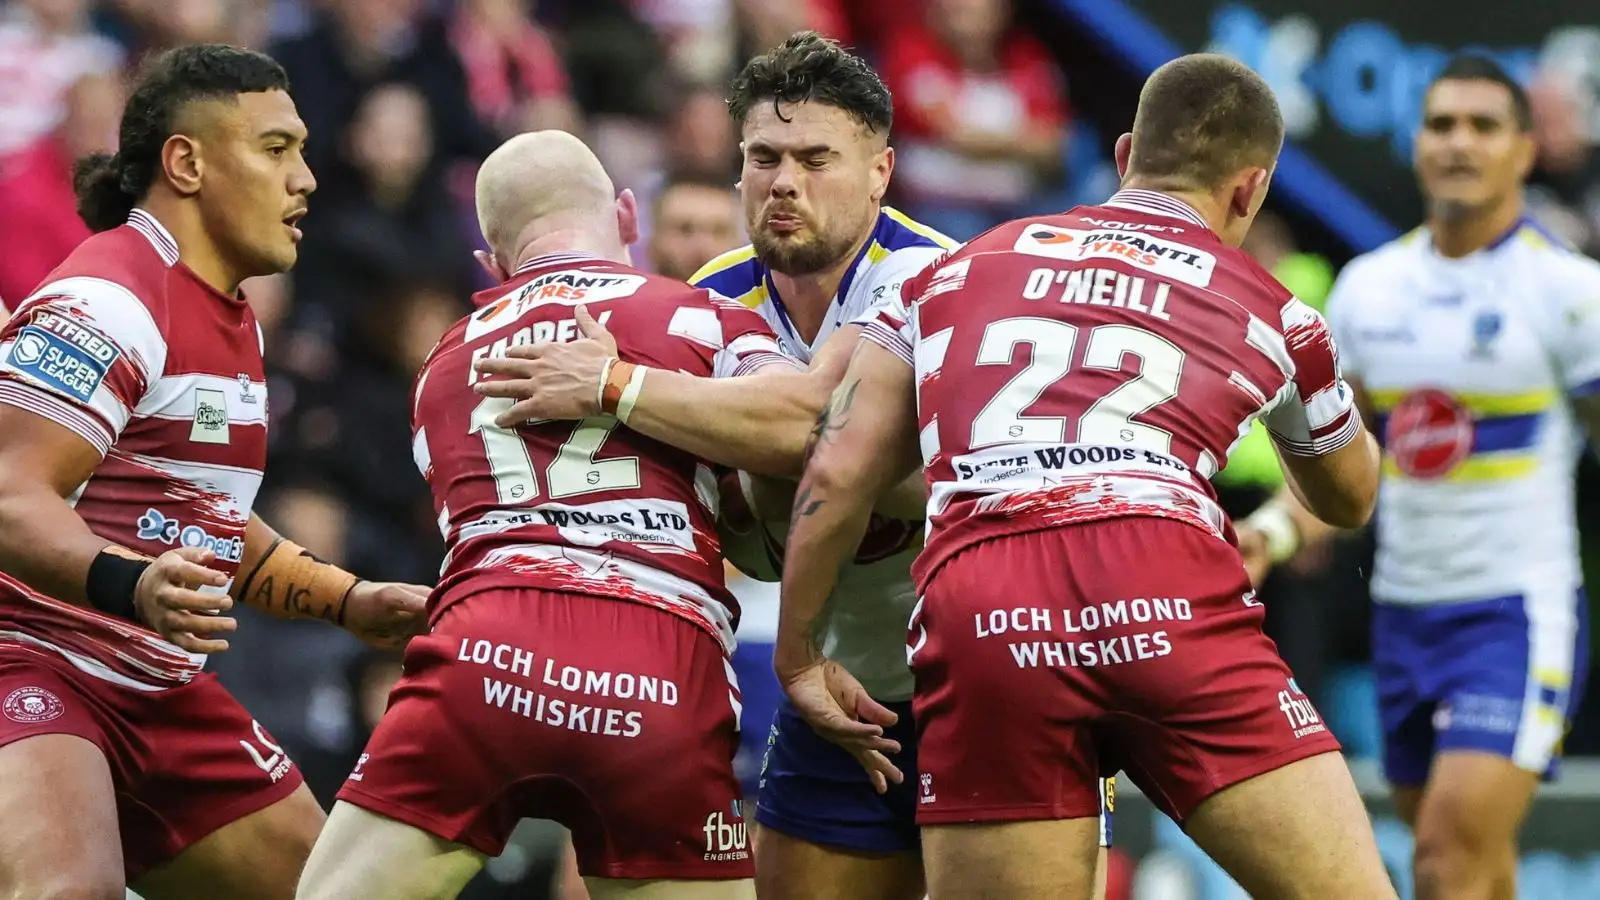 Wigan Warriors boss explains absence of key duo in Castleford Tigers win as top spot retained